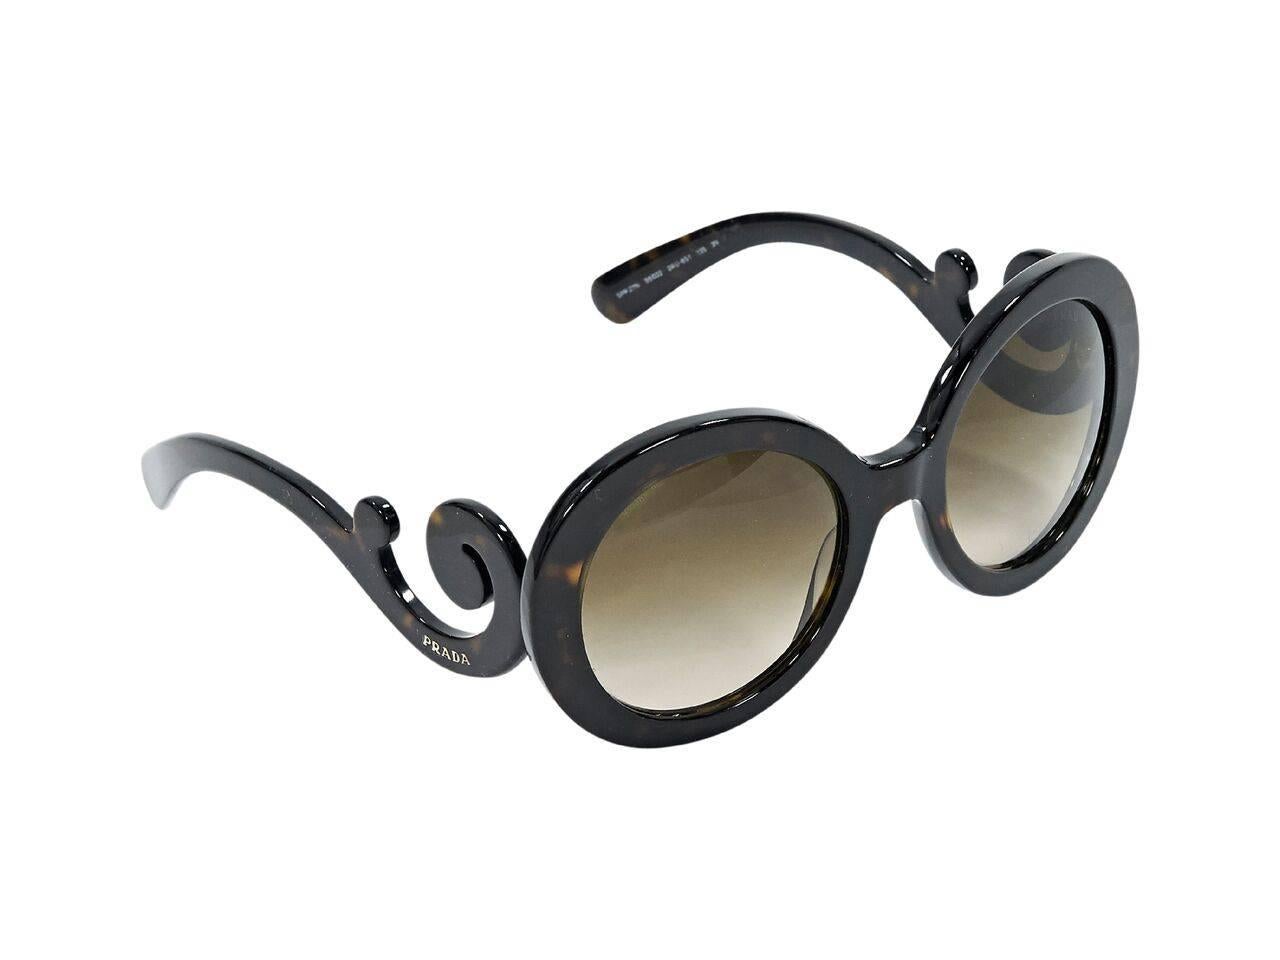 Product details:  Brown oversized round Baroque sunglasses by Prada.  Gradient lenses. 
Condition: Pre-owned. Very good.
Est. Retail $ 598.00